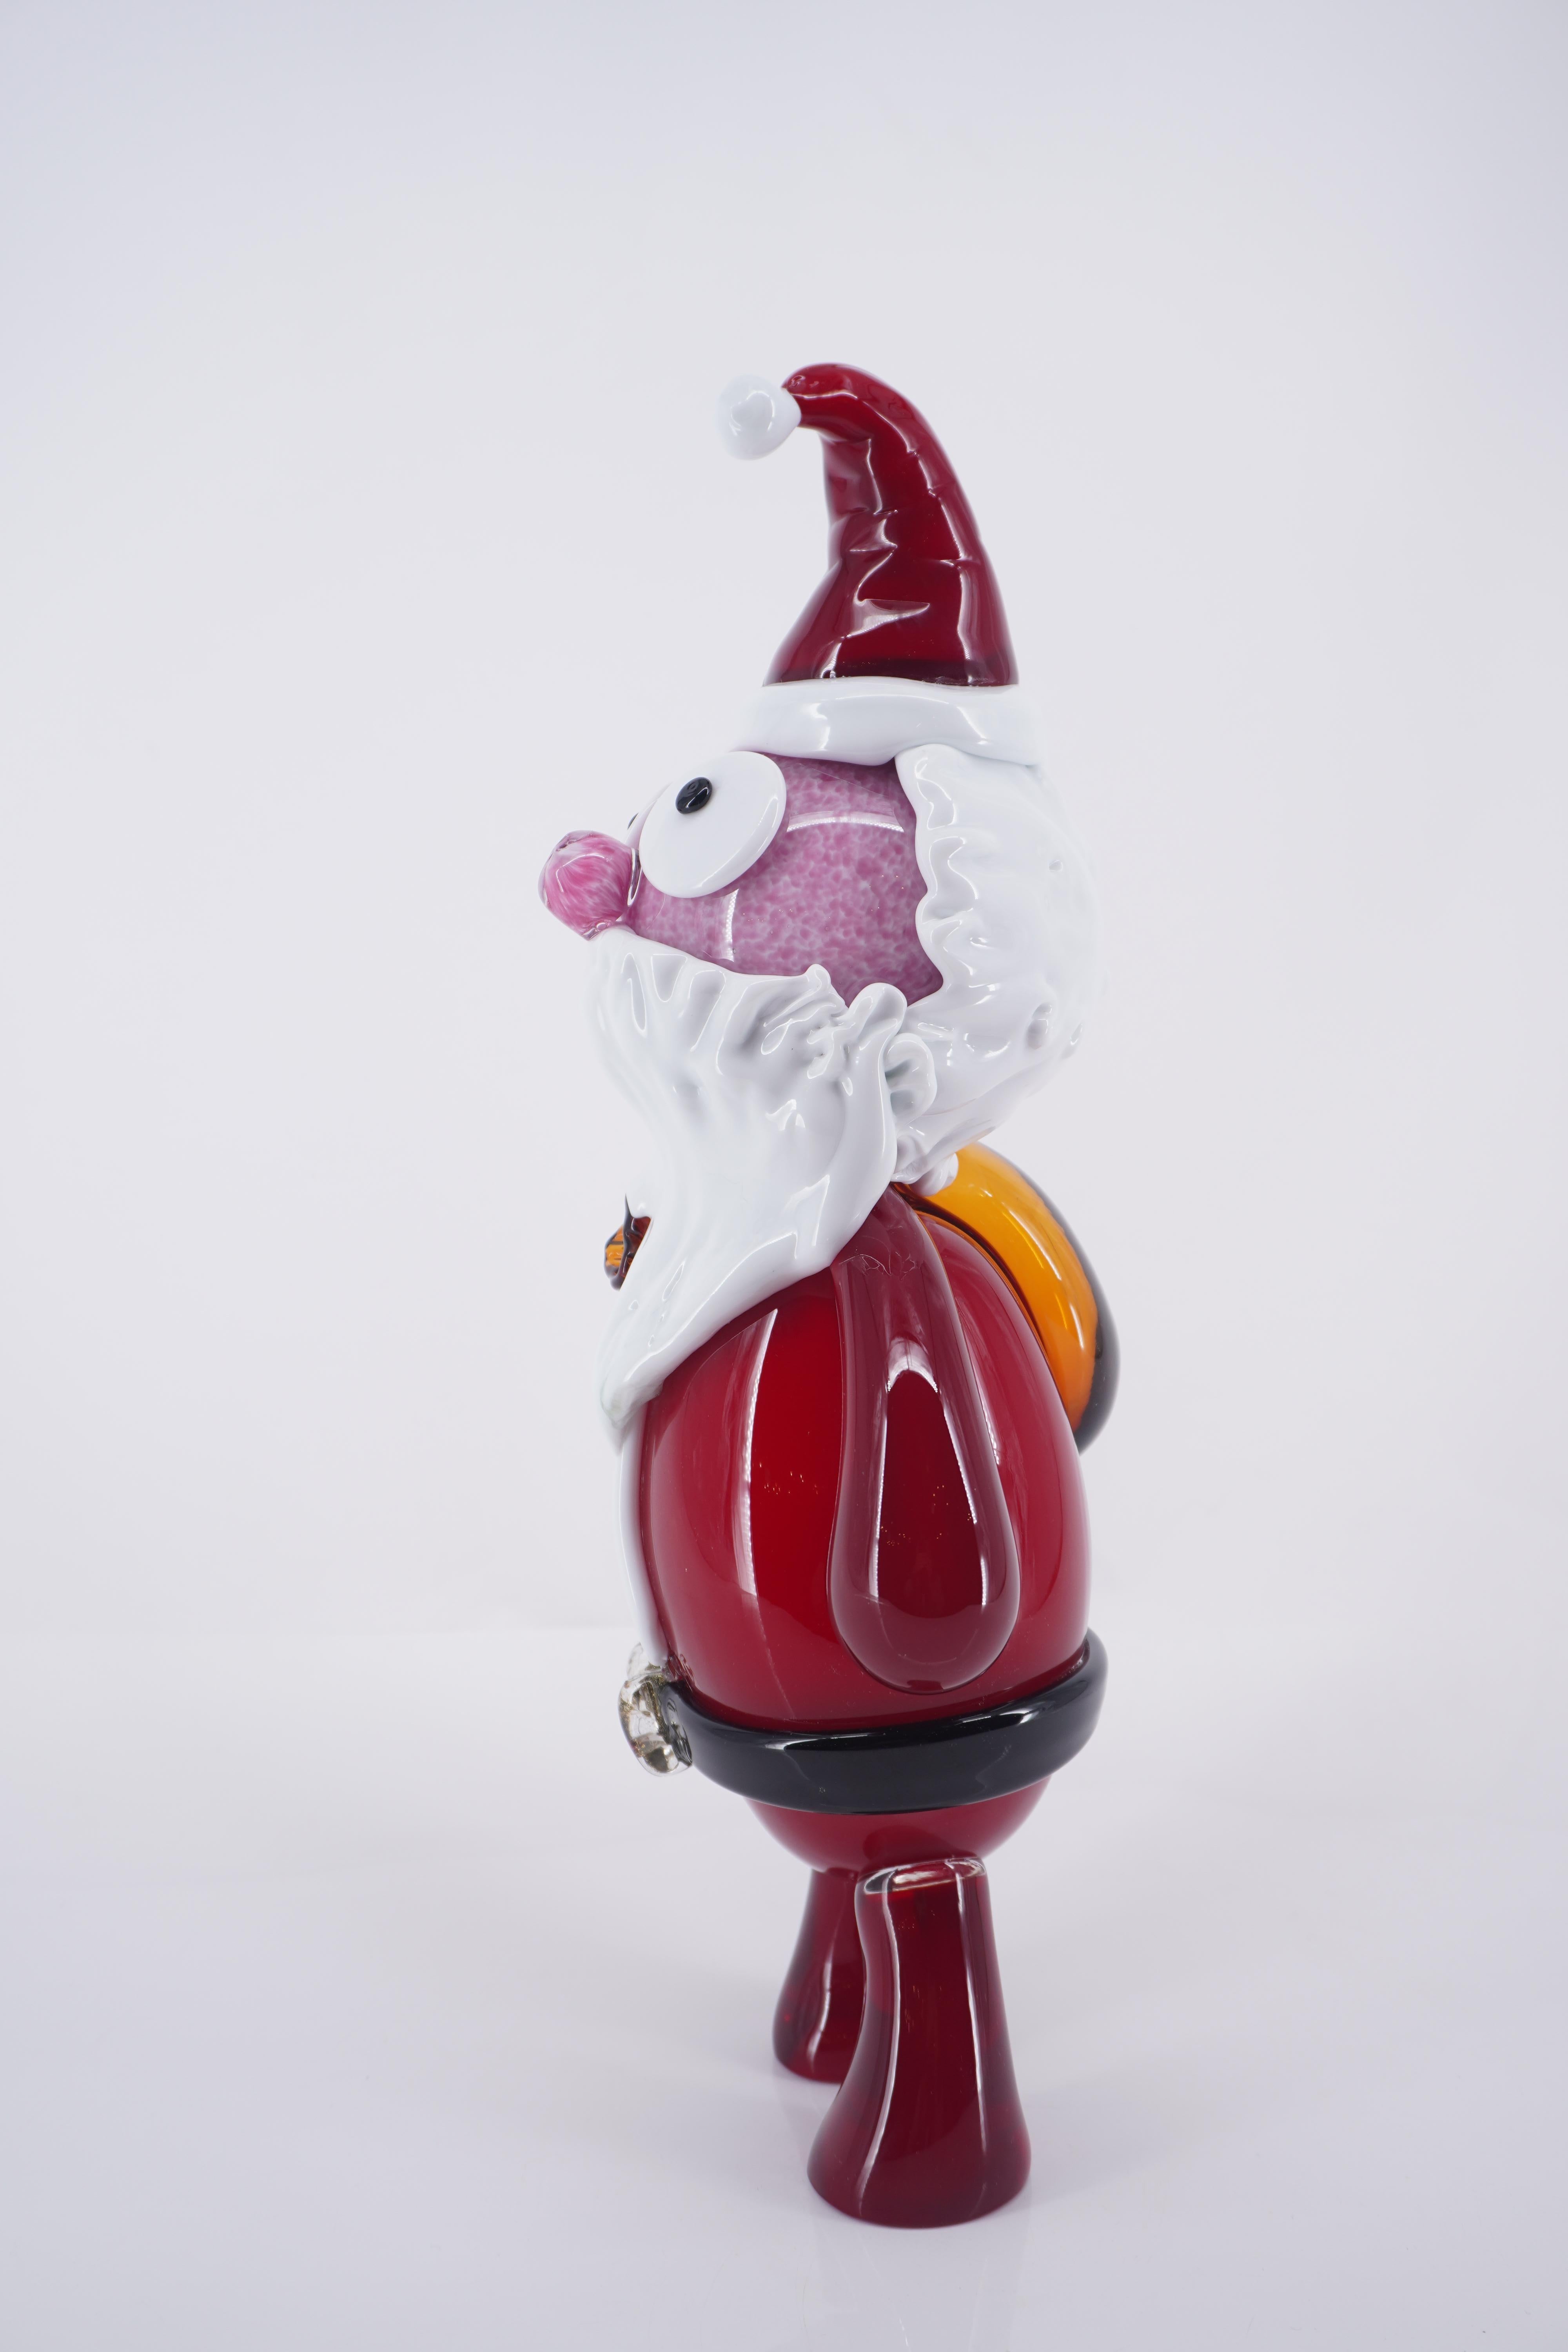 Hand-Crafted Pop Comic Artistic Murano Glass Sculpture Santa Claus For Sale